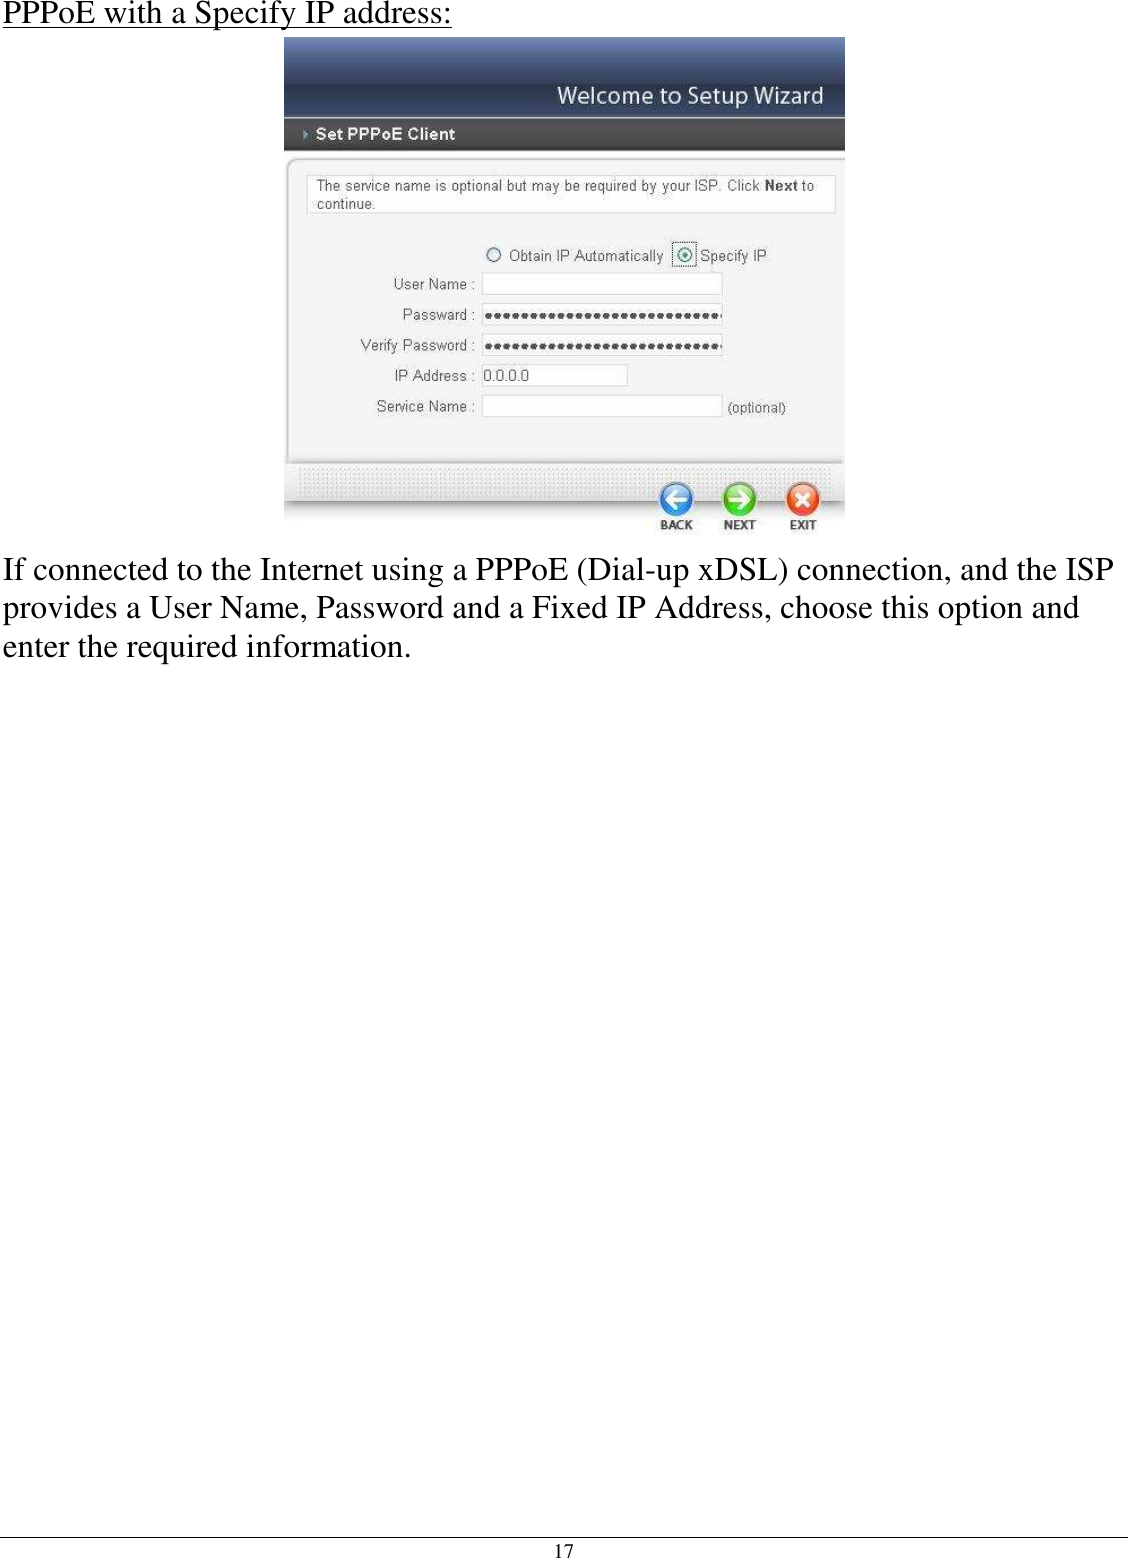 17 PPPoE with a Specify IP address:  If connected to the Internet using a PPPoE (Dial-up xDSL) connection, and the ISP provides a User Name, Password and a Fixed IP Address, choose this option and enter the required information.  